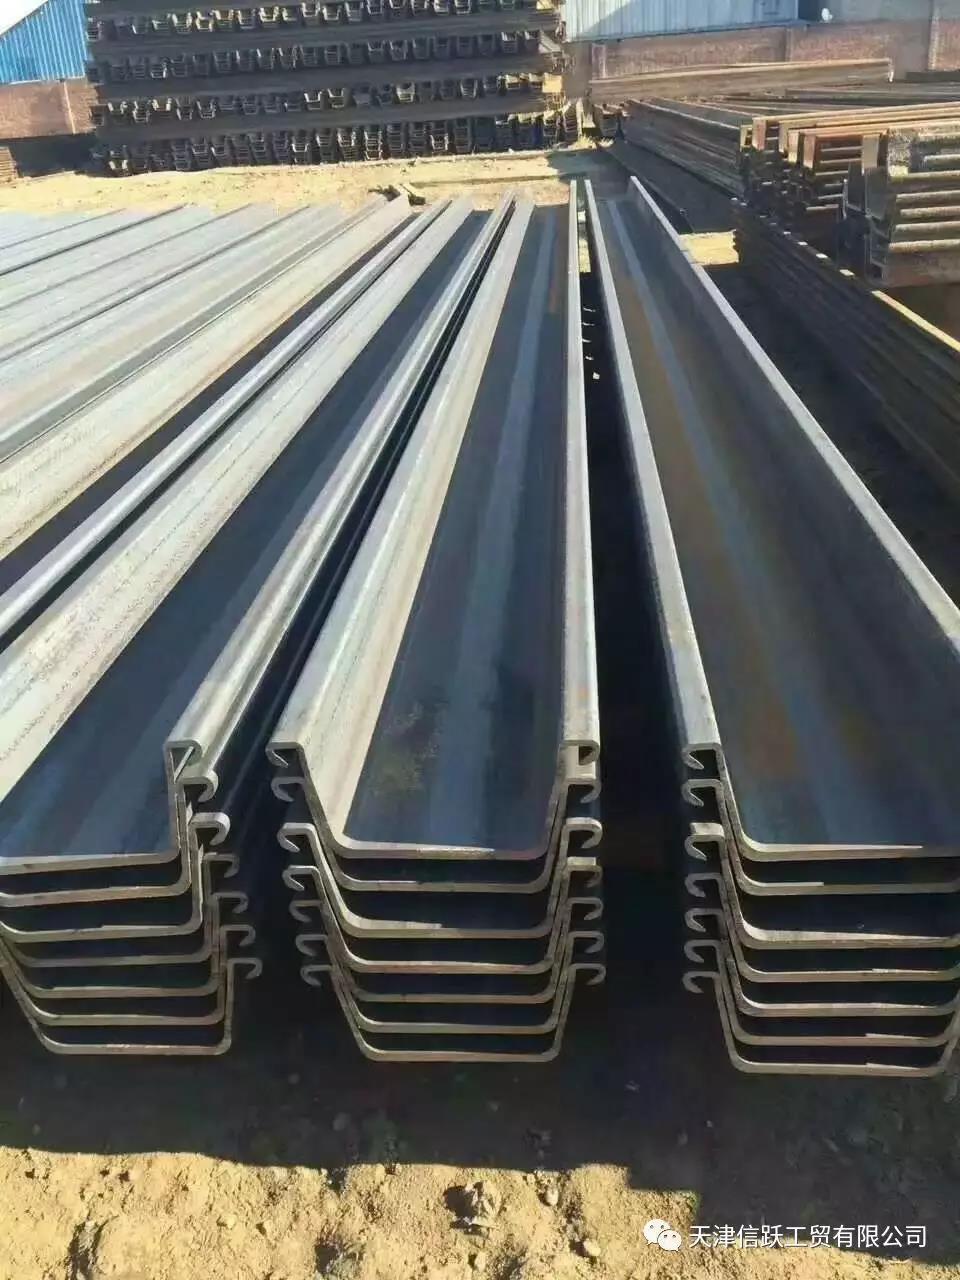 Steel Sheet Piles Are Successfully Shipped